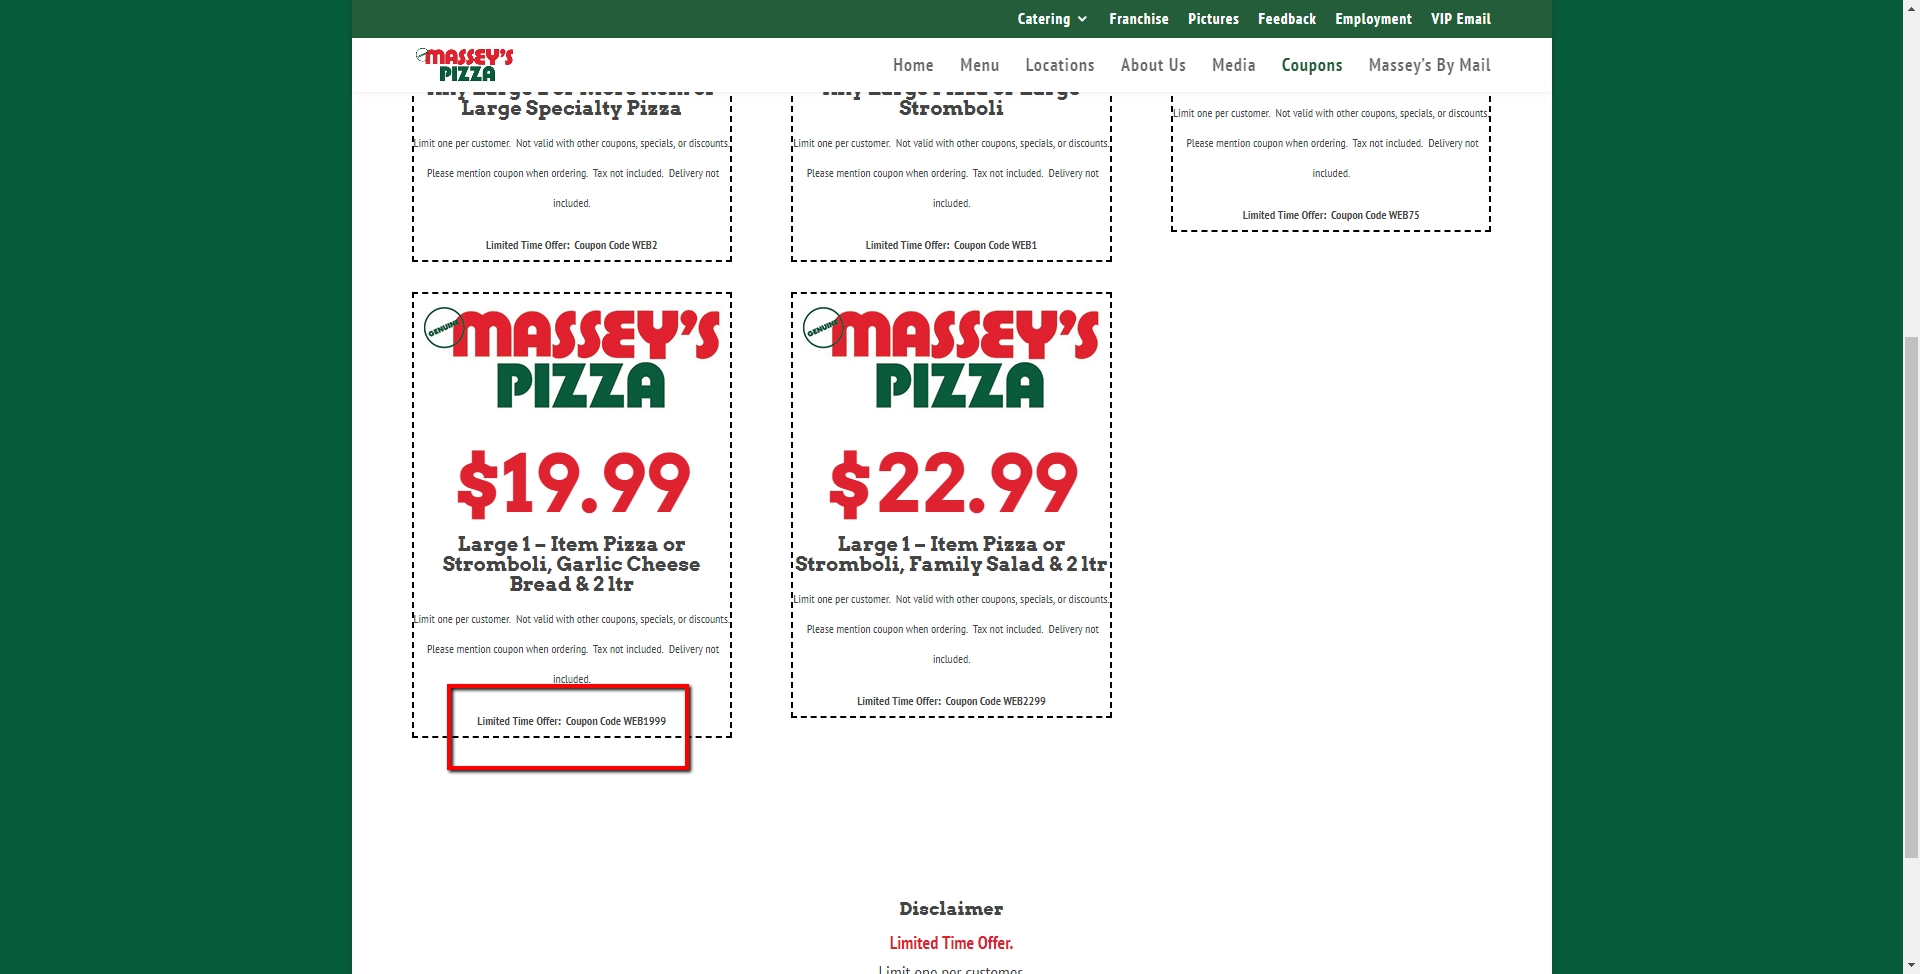 45 Off Massey's Pizza Coupon Code Massey's Pizza 2018 Codes Dealspotr